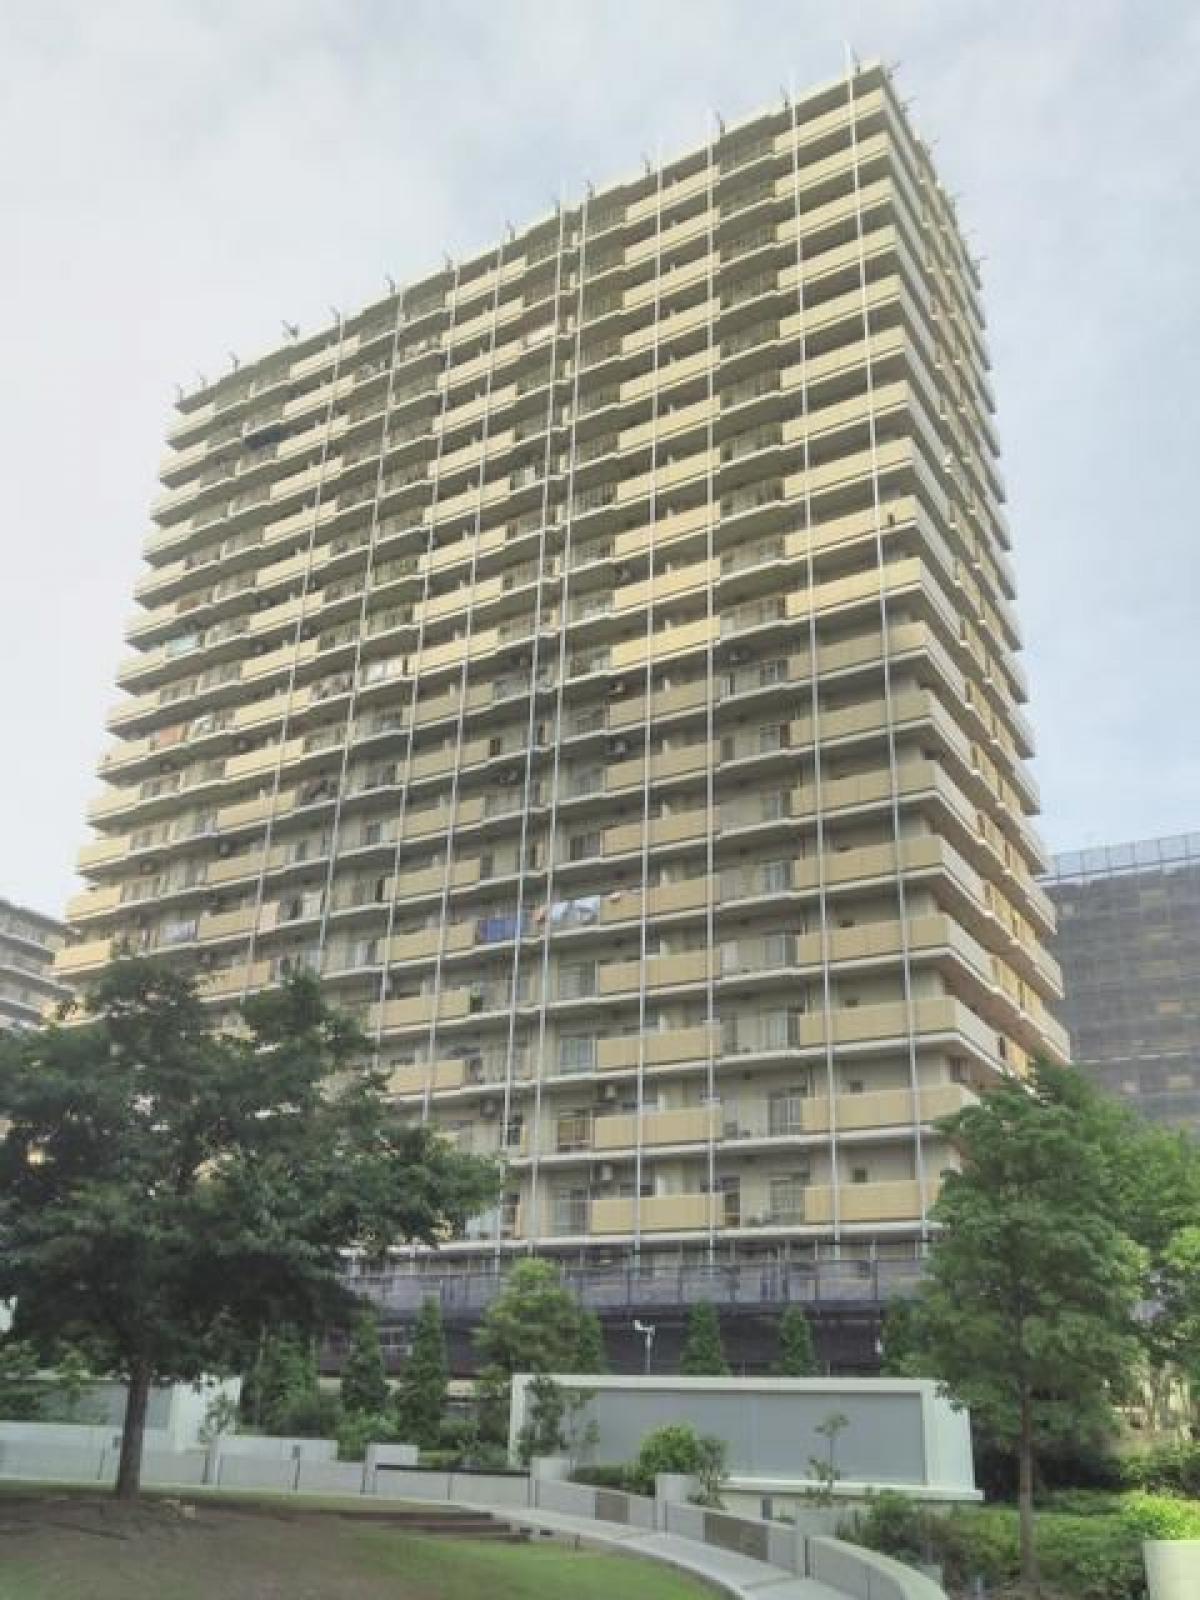 Picture of Apartment For Sale in Koto Ku, Tokyo, Japan